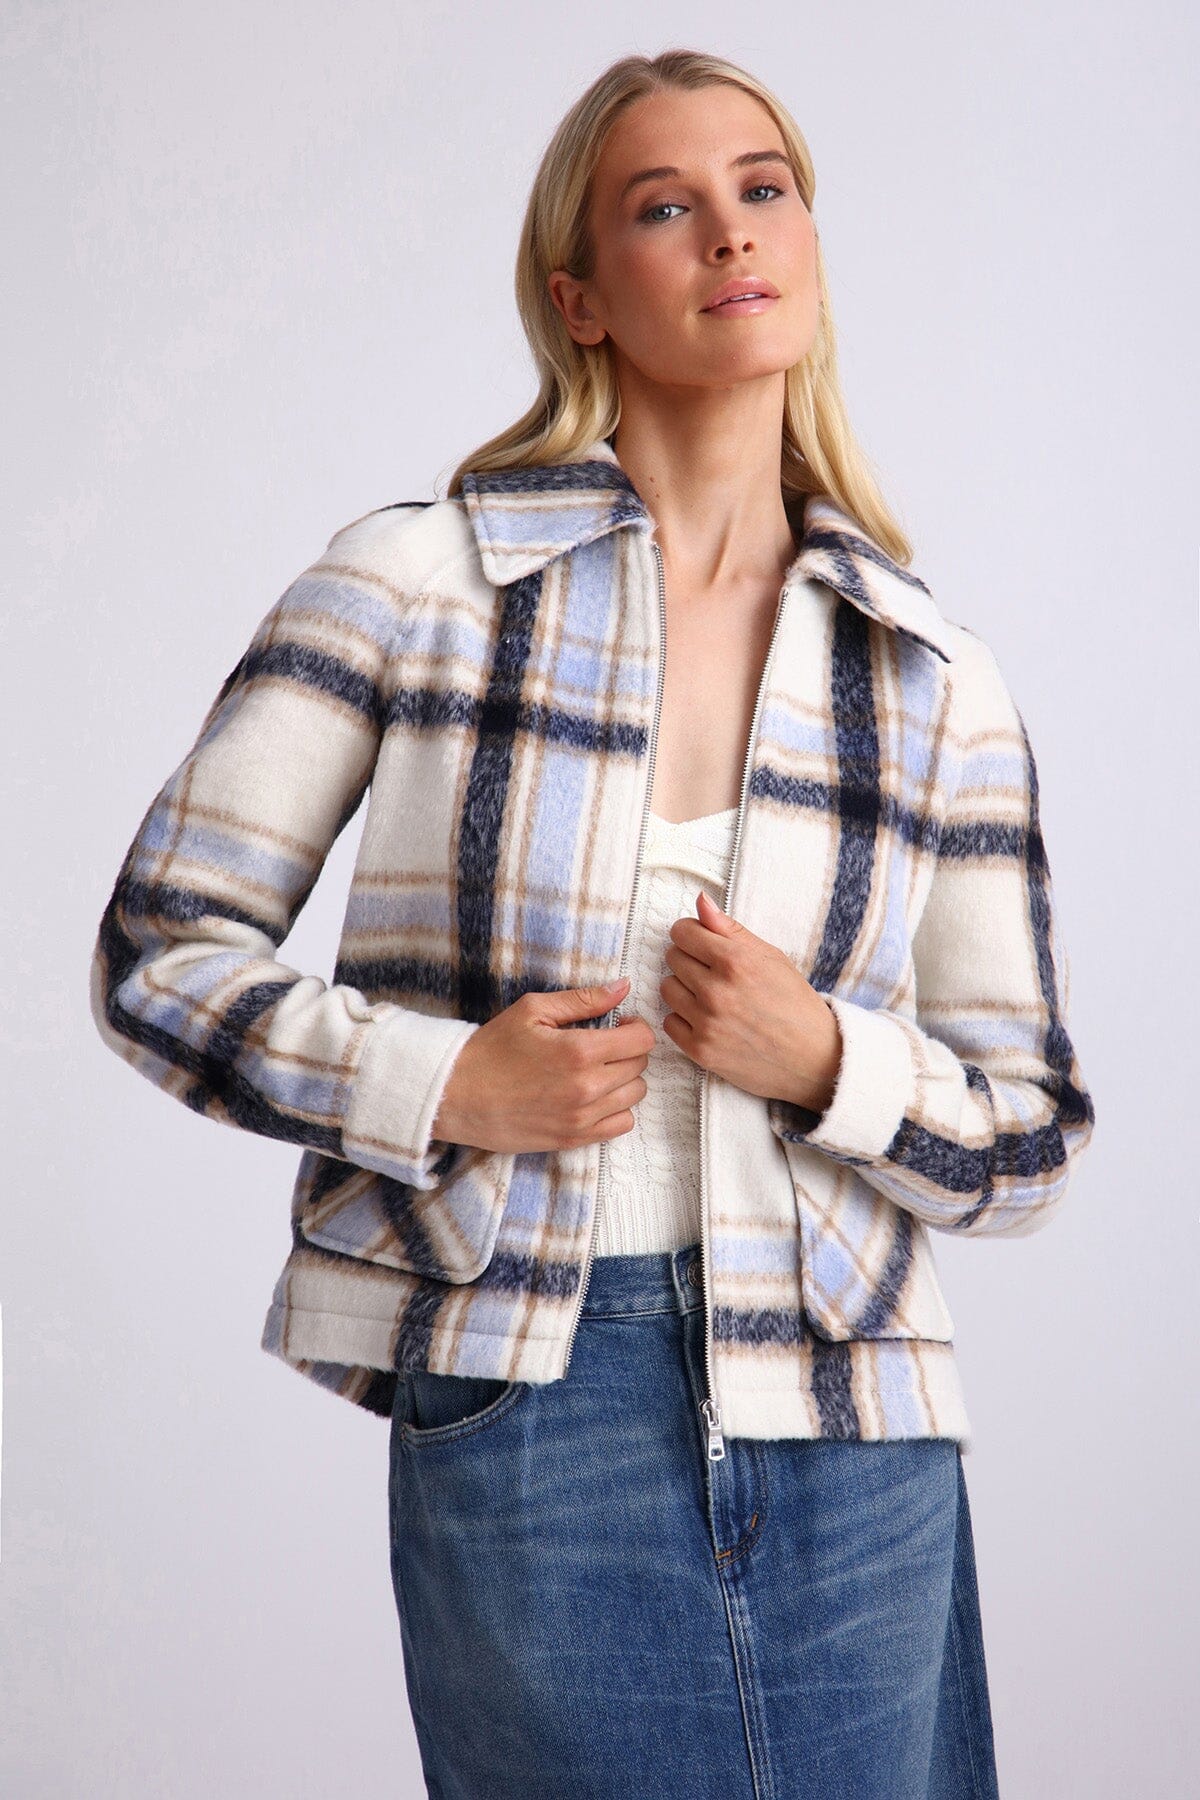 Blue cream plaid brushed zip front jacket coat - figure flattering day to night lightweight jackets coats for women